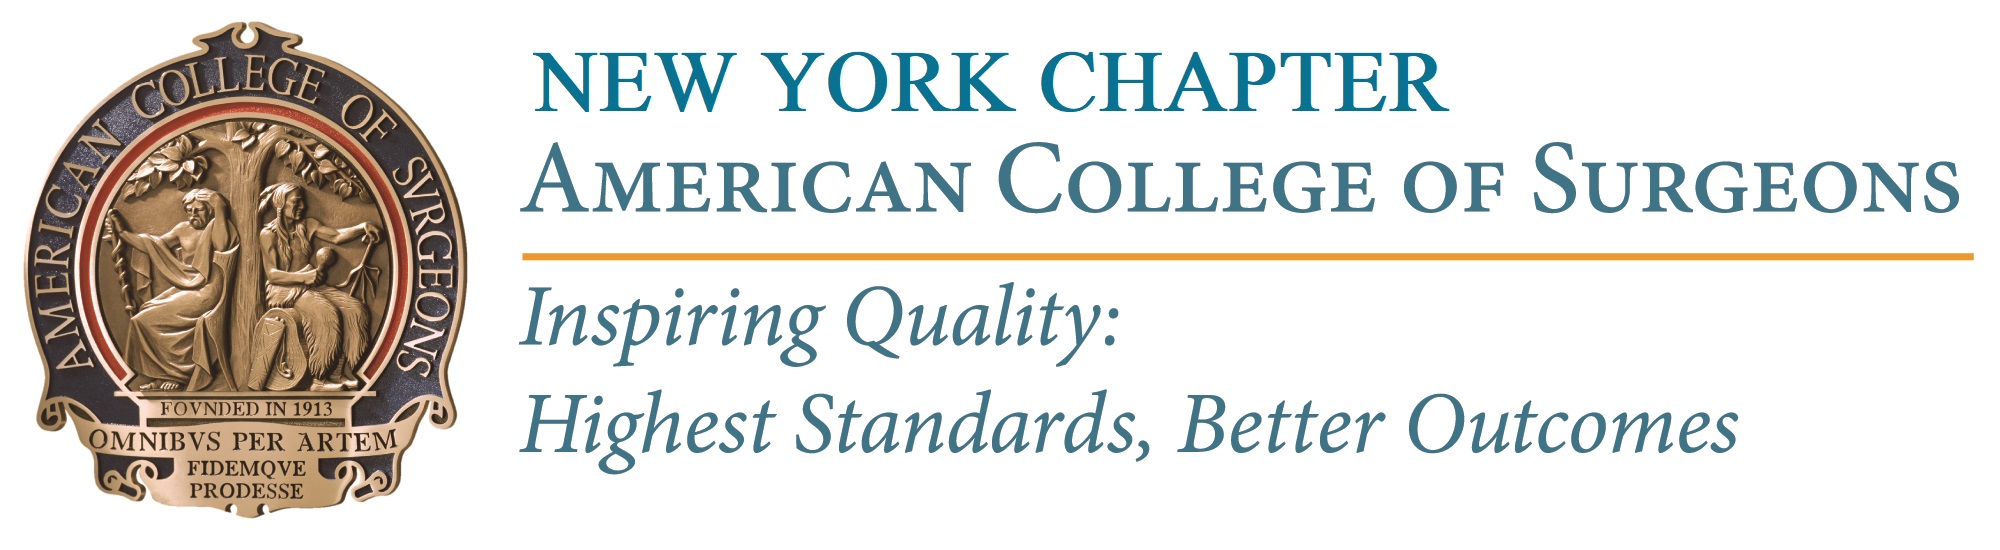 New York Chapter American College of Surgeons